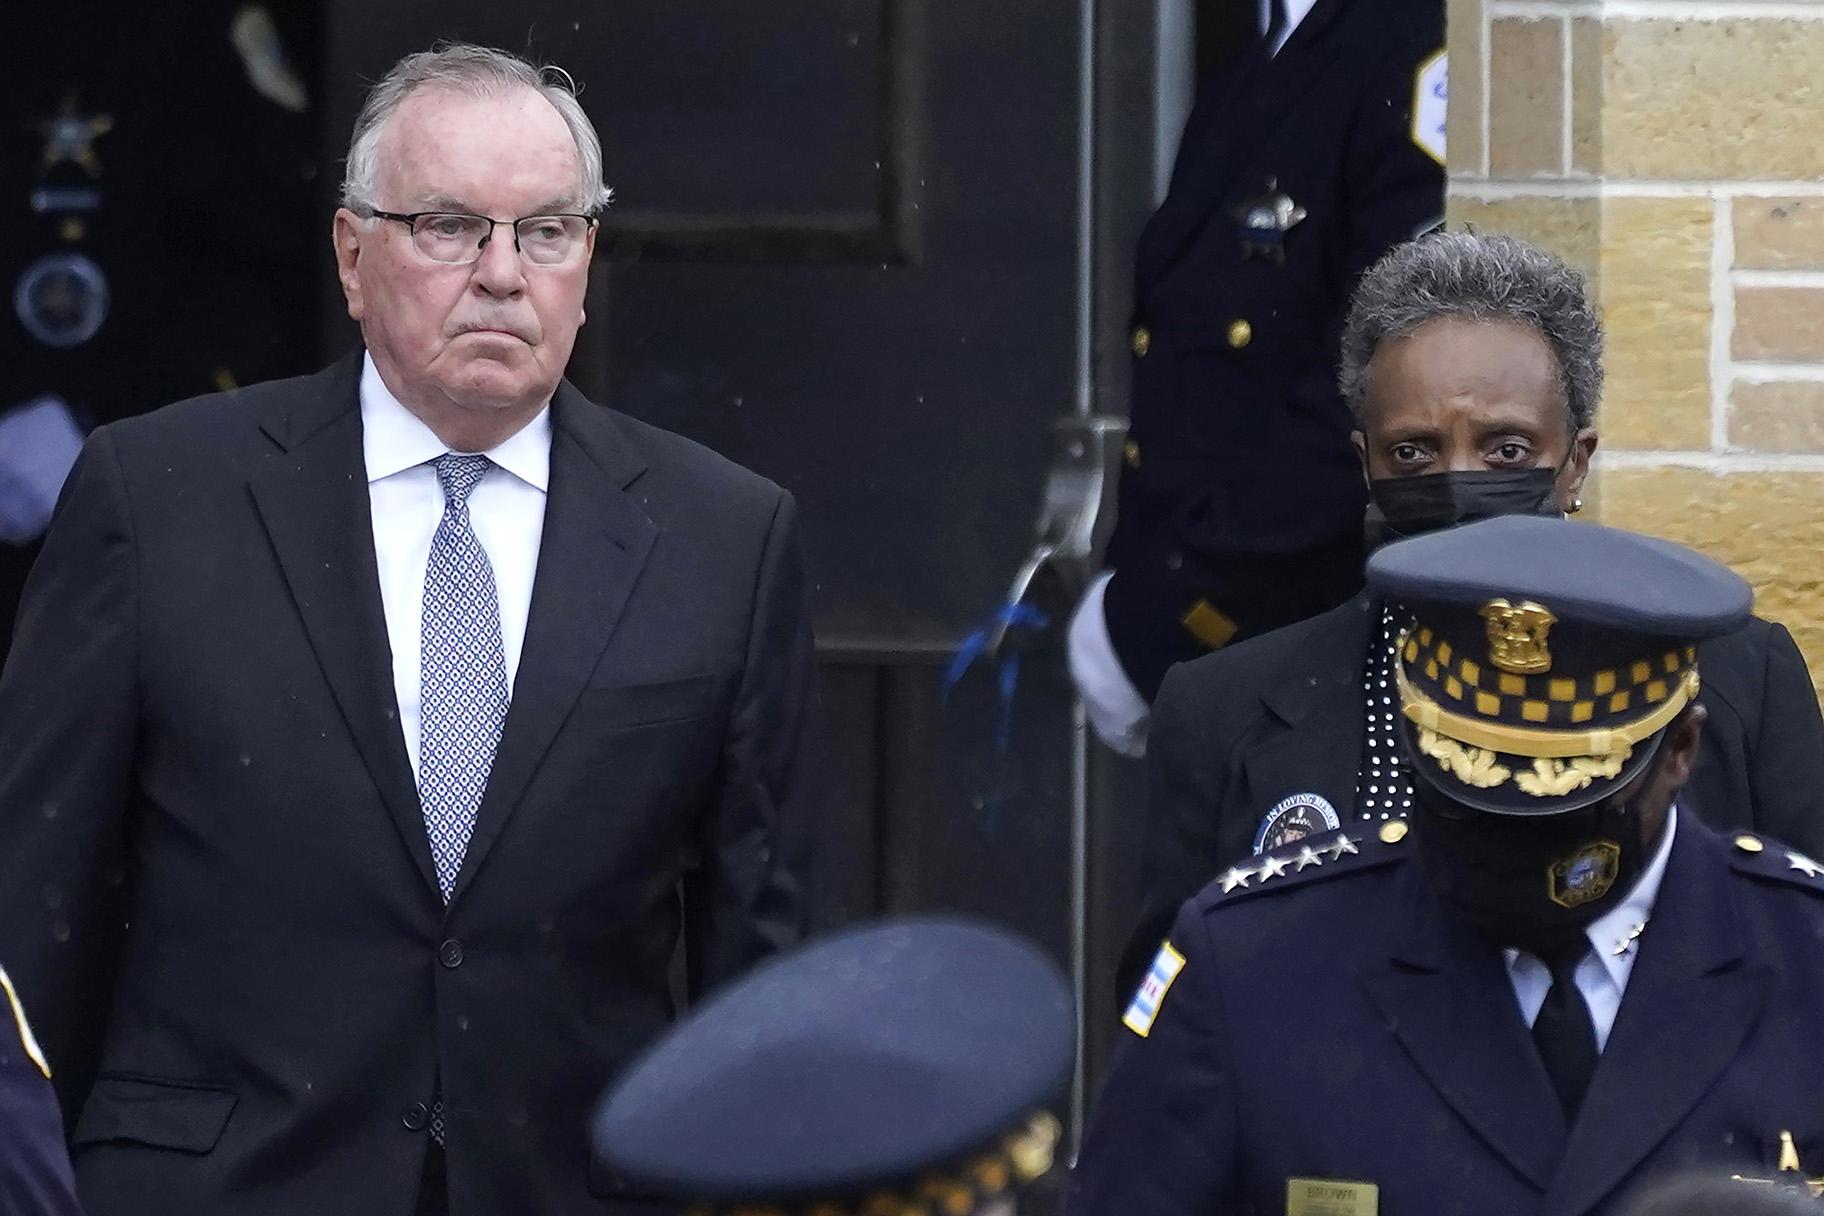 Former Chicago mayor Richard M. Daley, left, and Mayor Lori Lightfoot depart the funeral service for Chicago police officer Ella French at the St. Rita of Cascia Shrine Chapel Thursday, Aug. 19, 2021, in Chicago. (AP Photo / Charles Rex Arbogast)